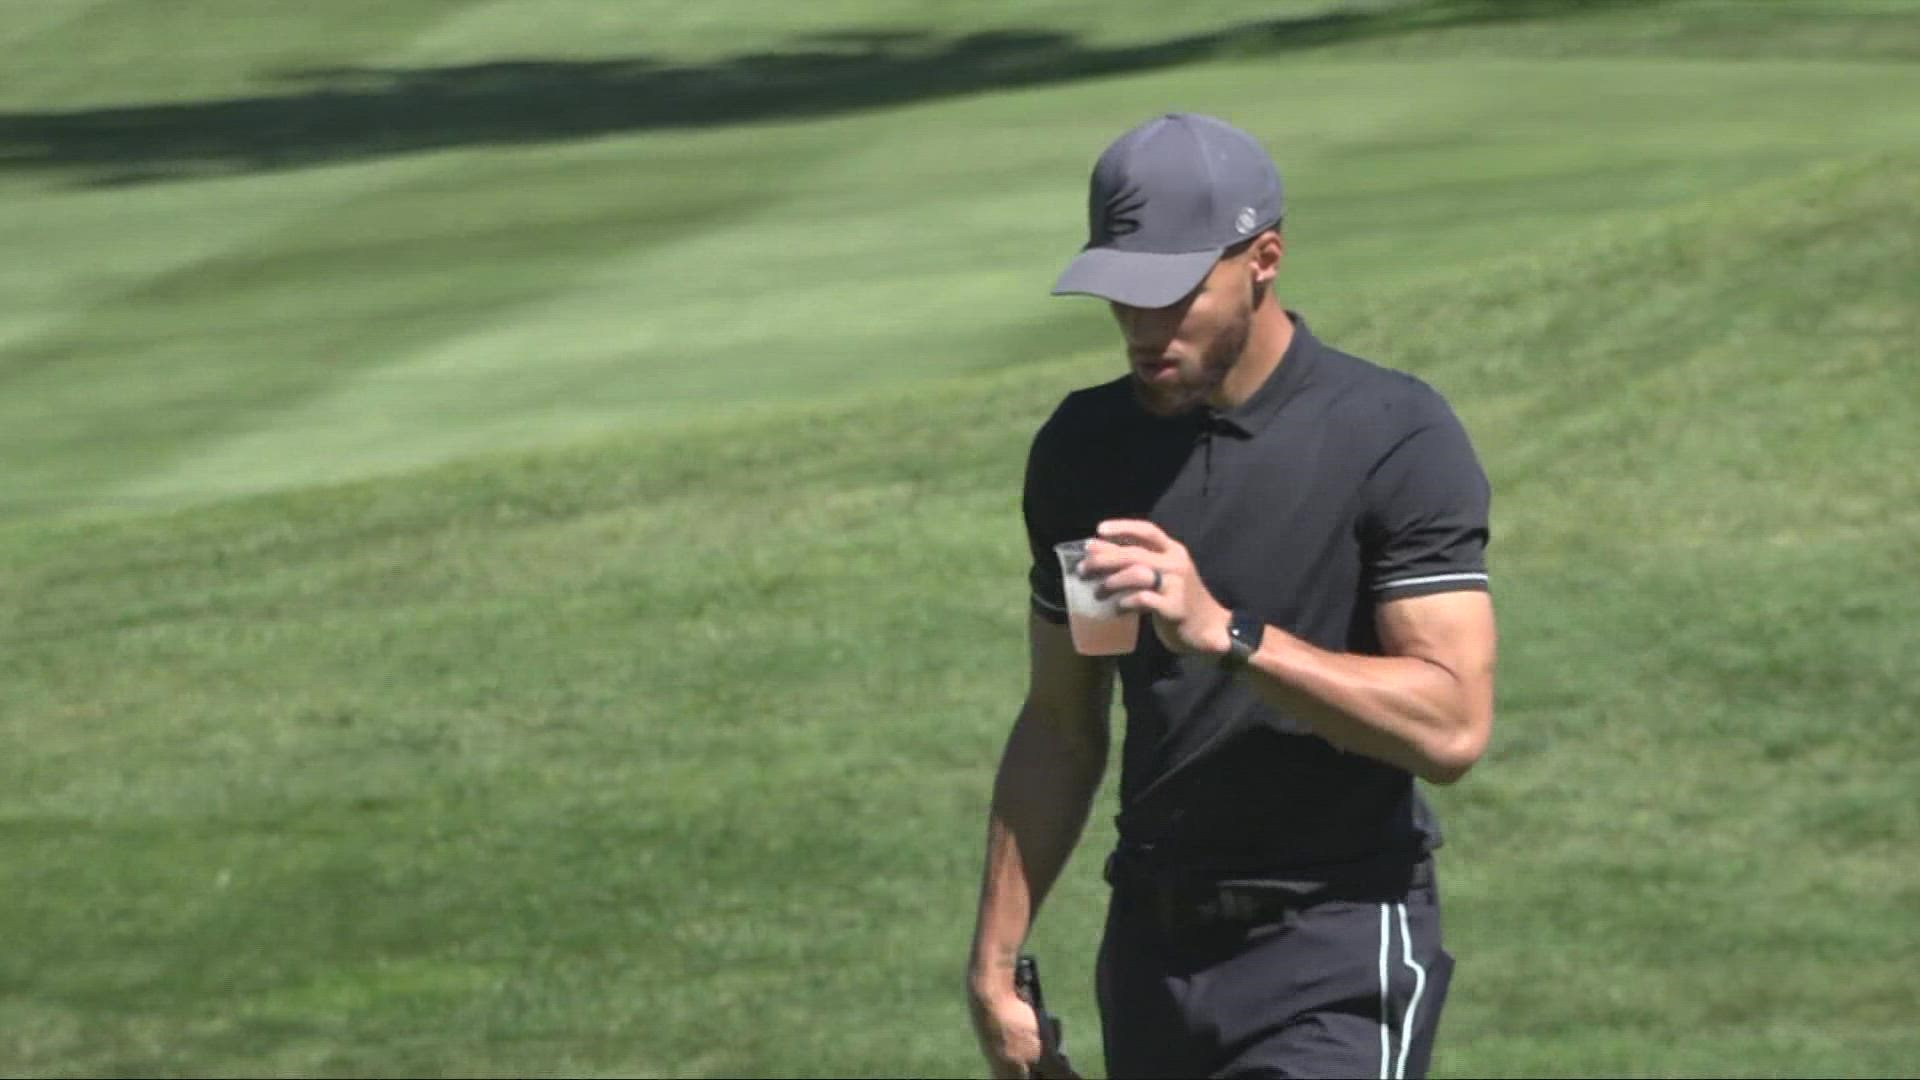 Steph Curry drains wild putt on No. 12 at American Century Championship -  NBC Sports